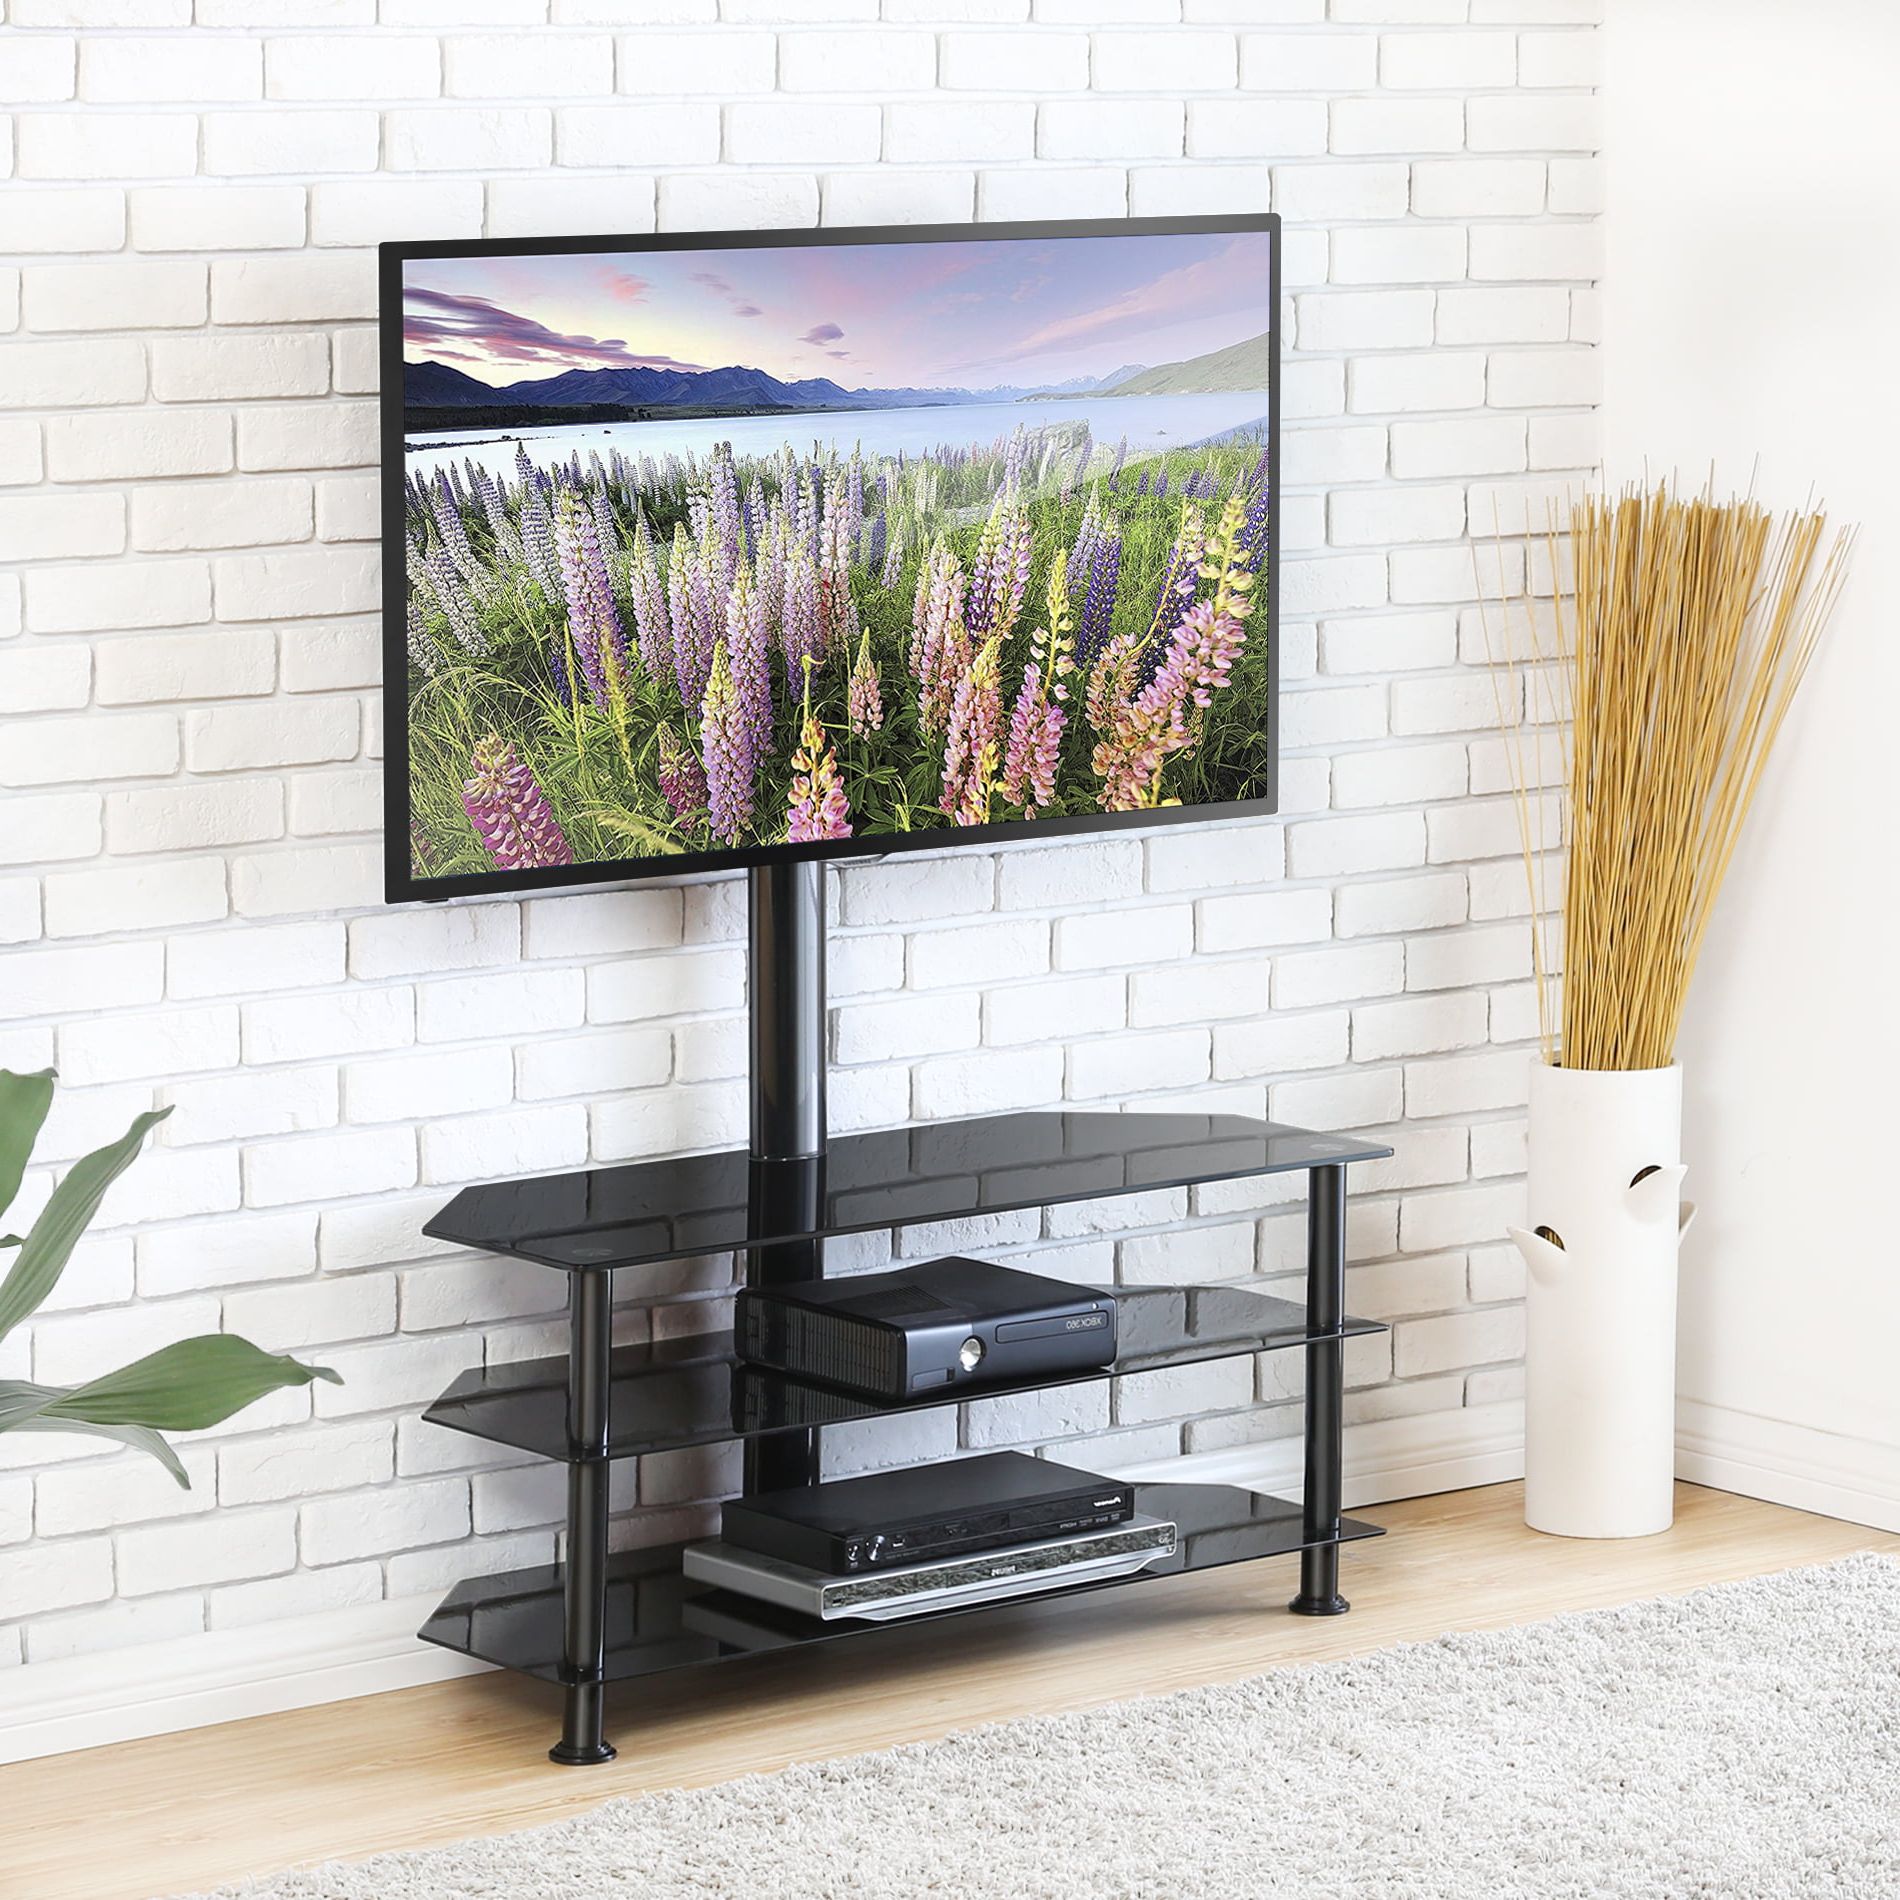 Recent Fitueyes Swivel Floor Tv Stand With Mount, Height Adjustable 3 In 1 For Foldable Portable Adjustable Tv Stands (View 12 of 15)